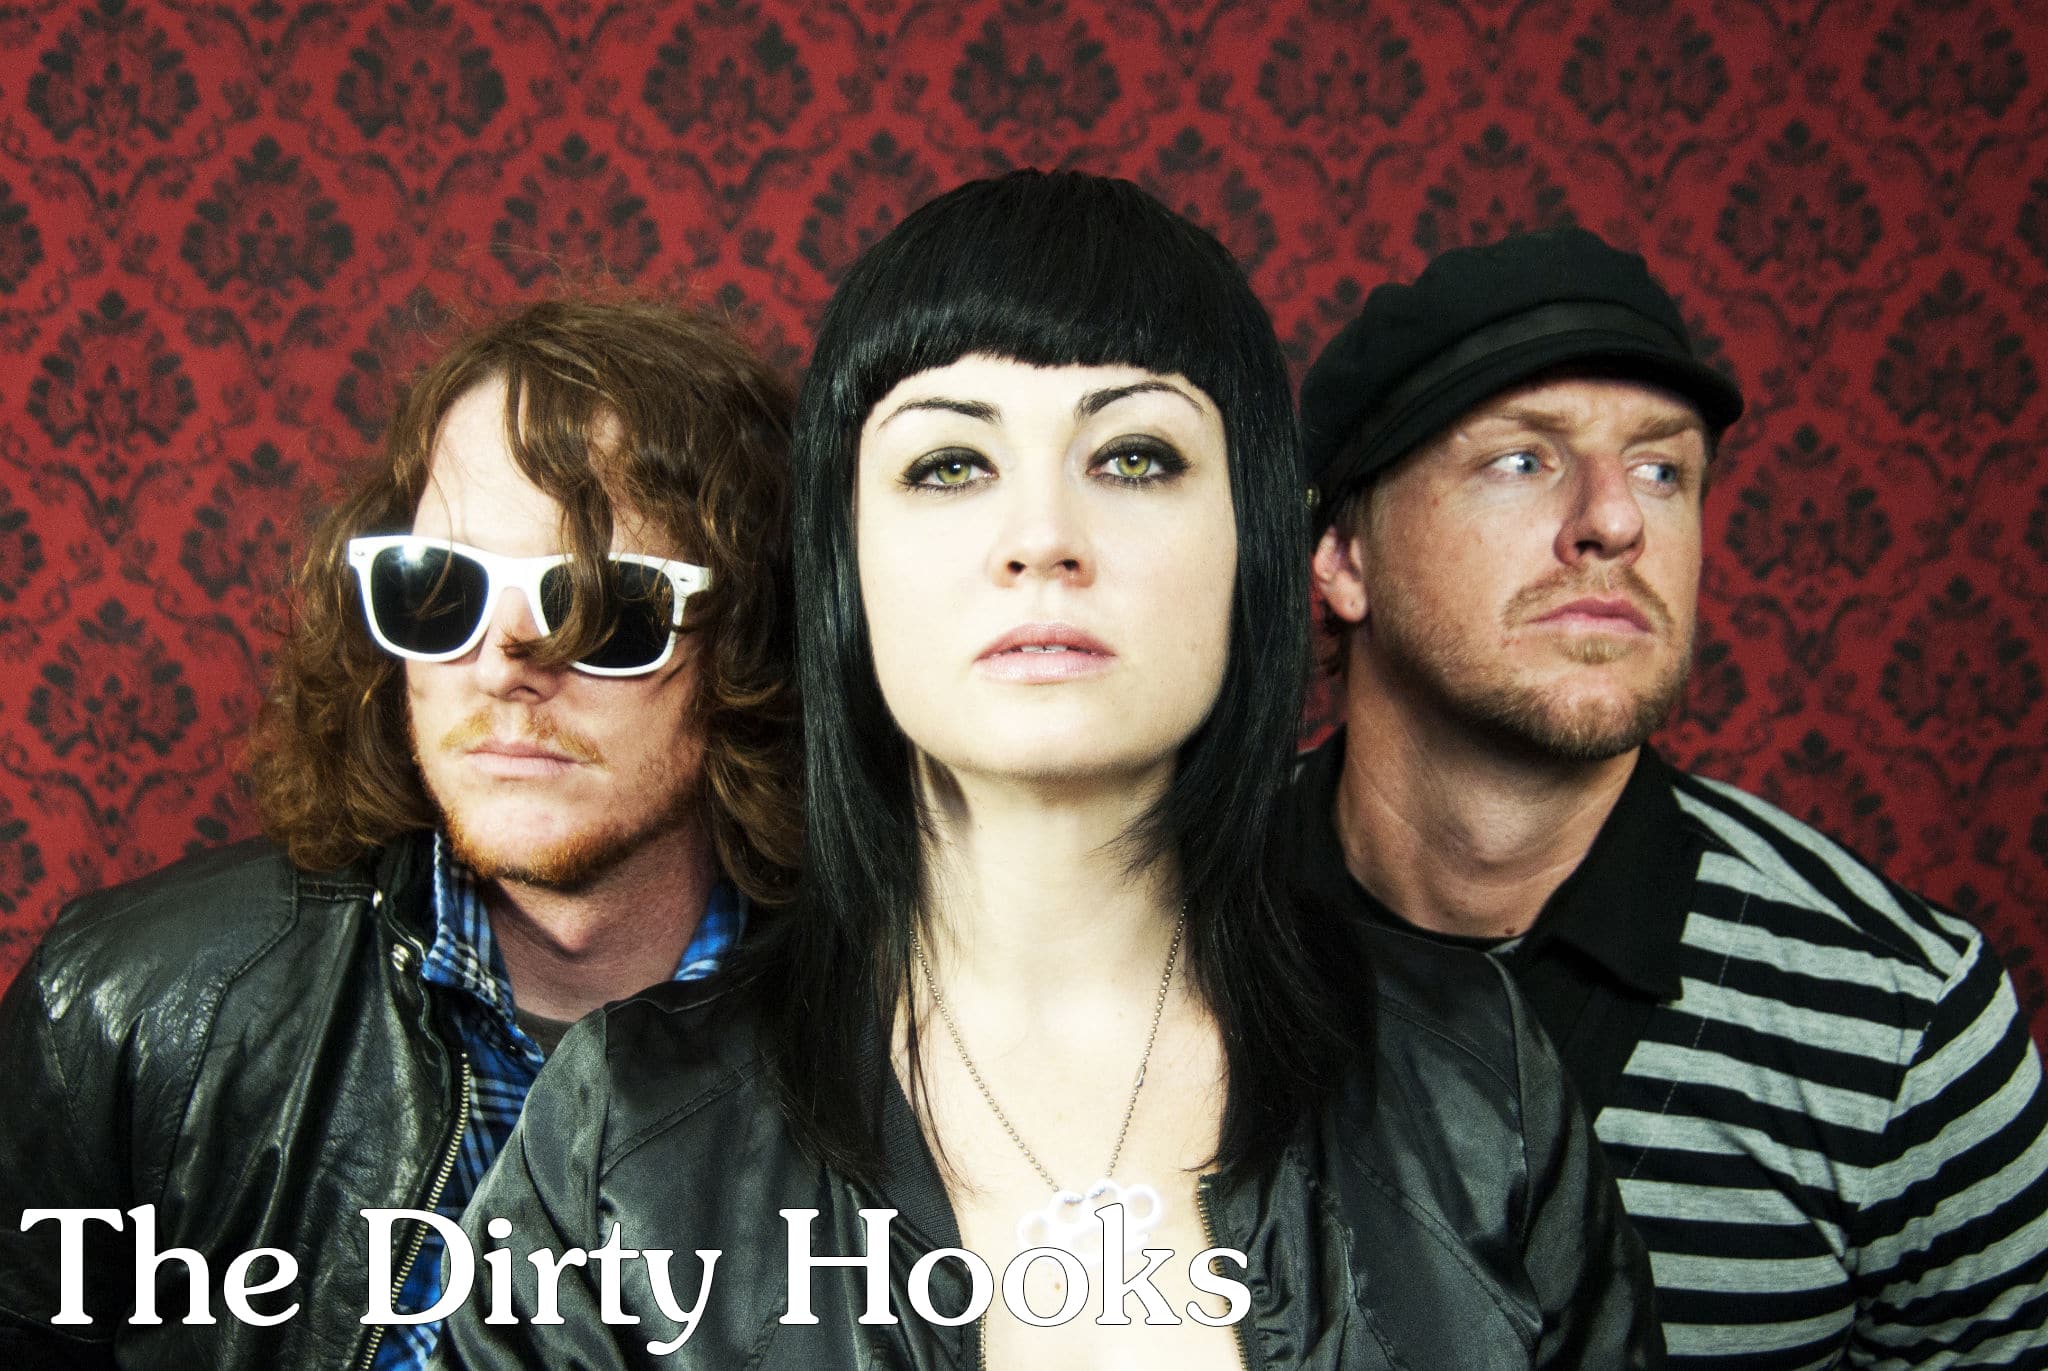 The Dirty Hooks